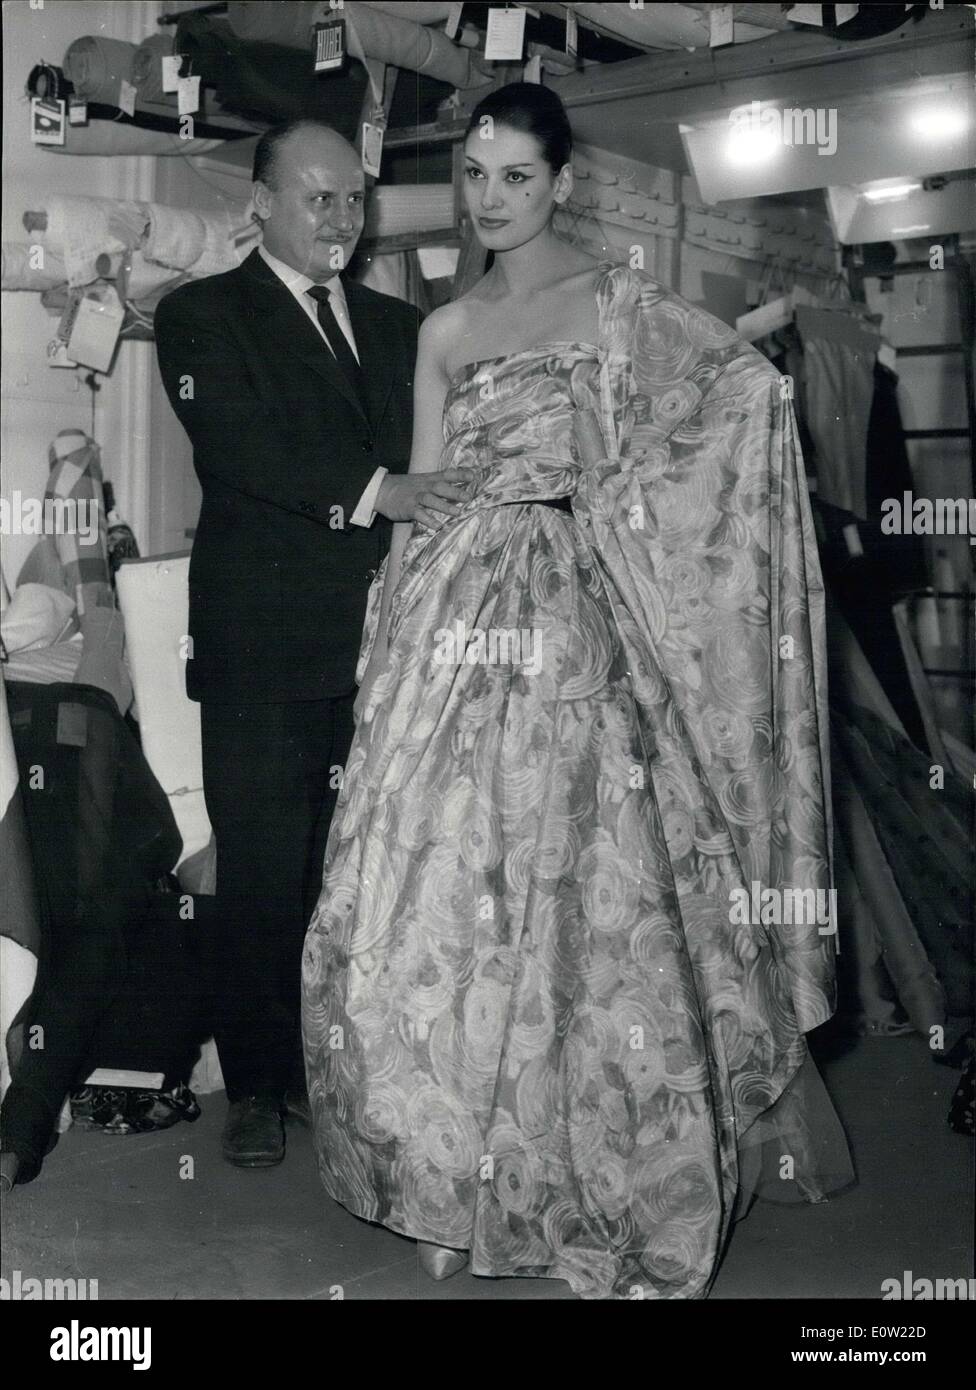 Jan. 23, 1961 - Fashion Show To Start Soon: Paris Couturiers will